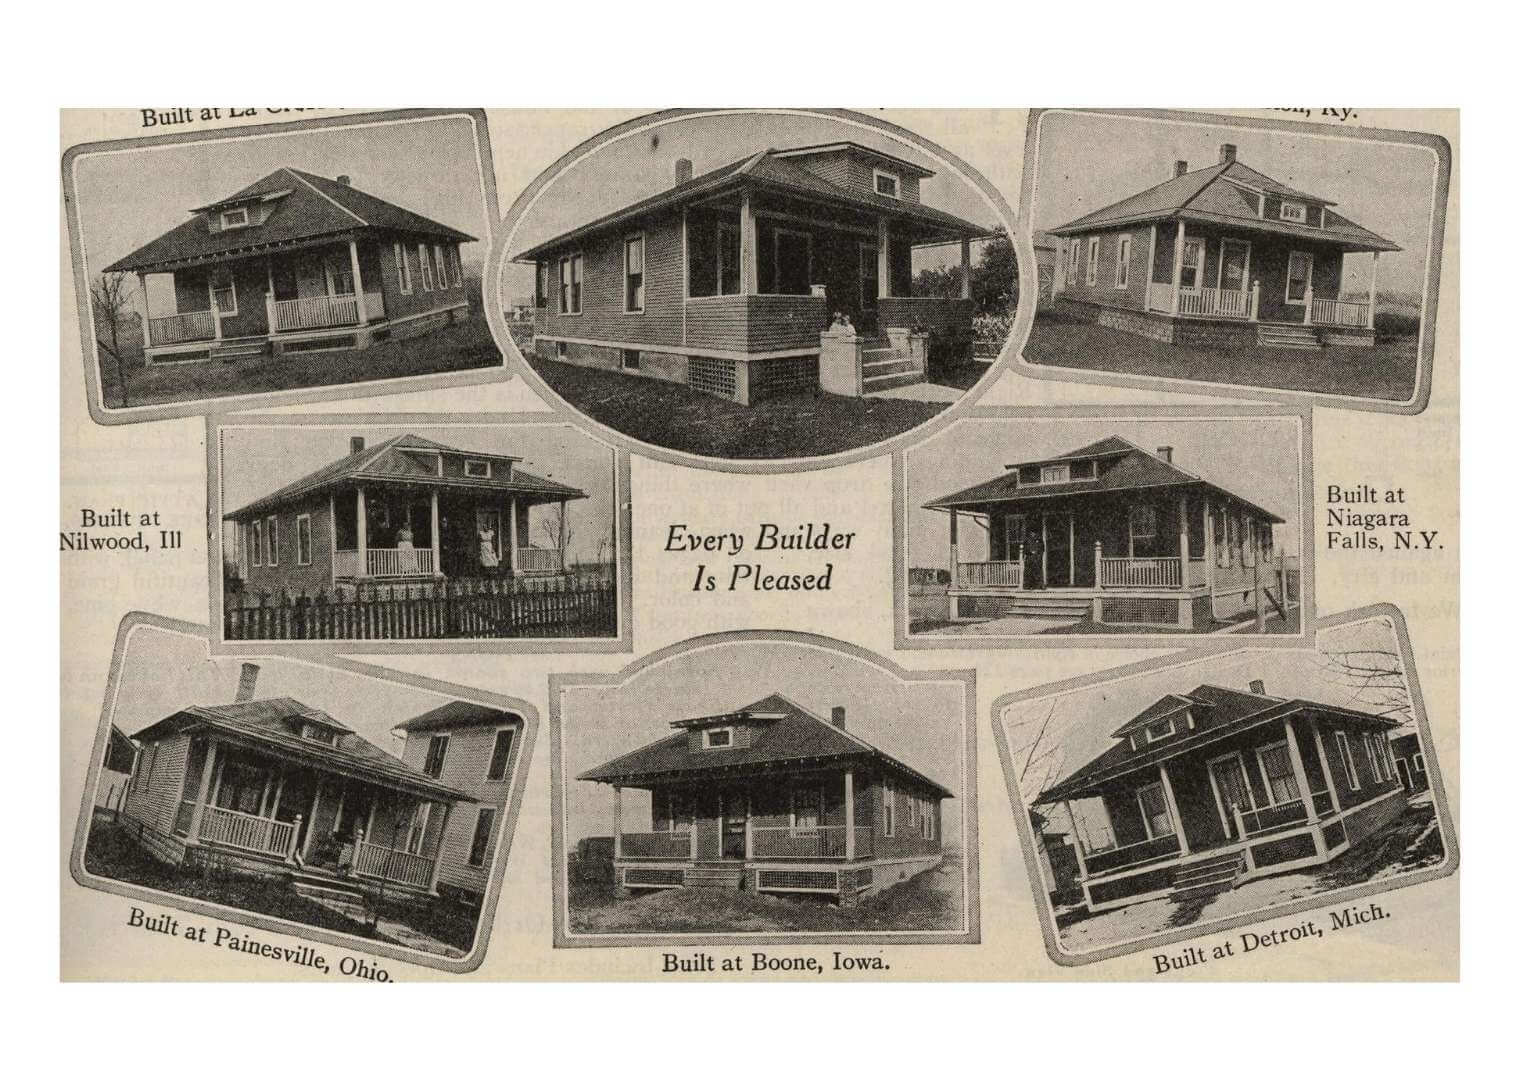 Businesses like Sears and The Aladdin Company sold prefab kits, making it easy for prospective homeowners to build their own Bungalows with the help of local craftsmen. In addition, after World War II returning veterans purchased affordable Bungalow homes using their G.I. bill funds.